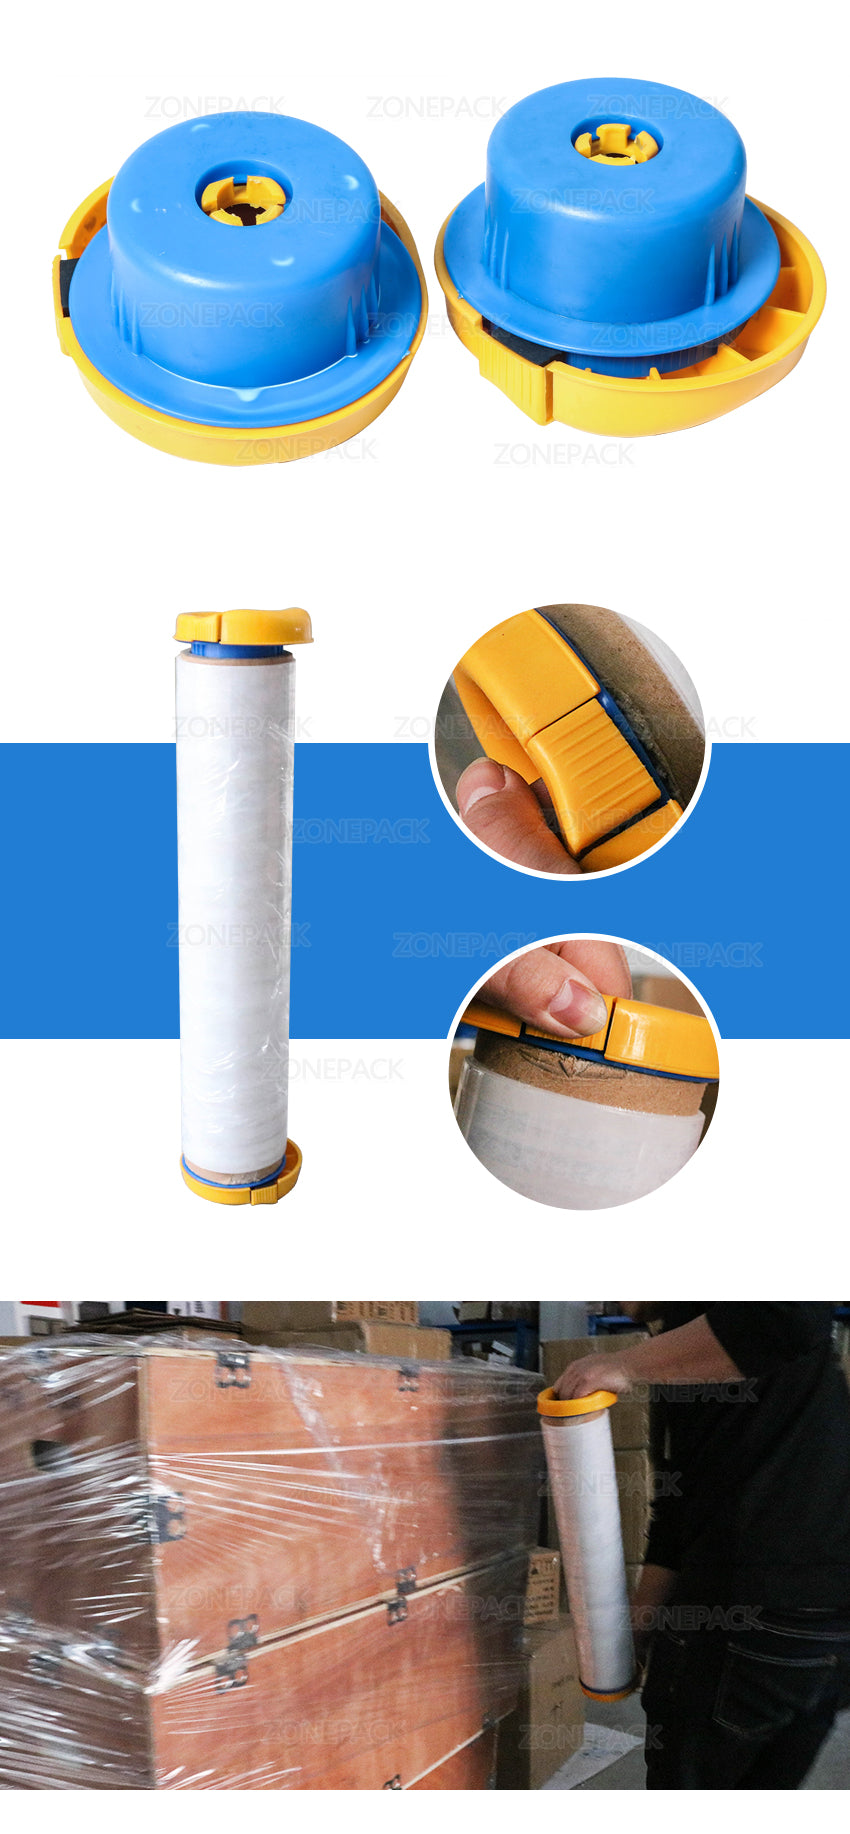 ZONEPACK Small Hand Stretch PVC Cling Film Wrap Dispenser With Brake Function Food Wrap Pallet Film Tool For Factory Packing